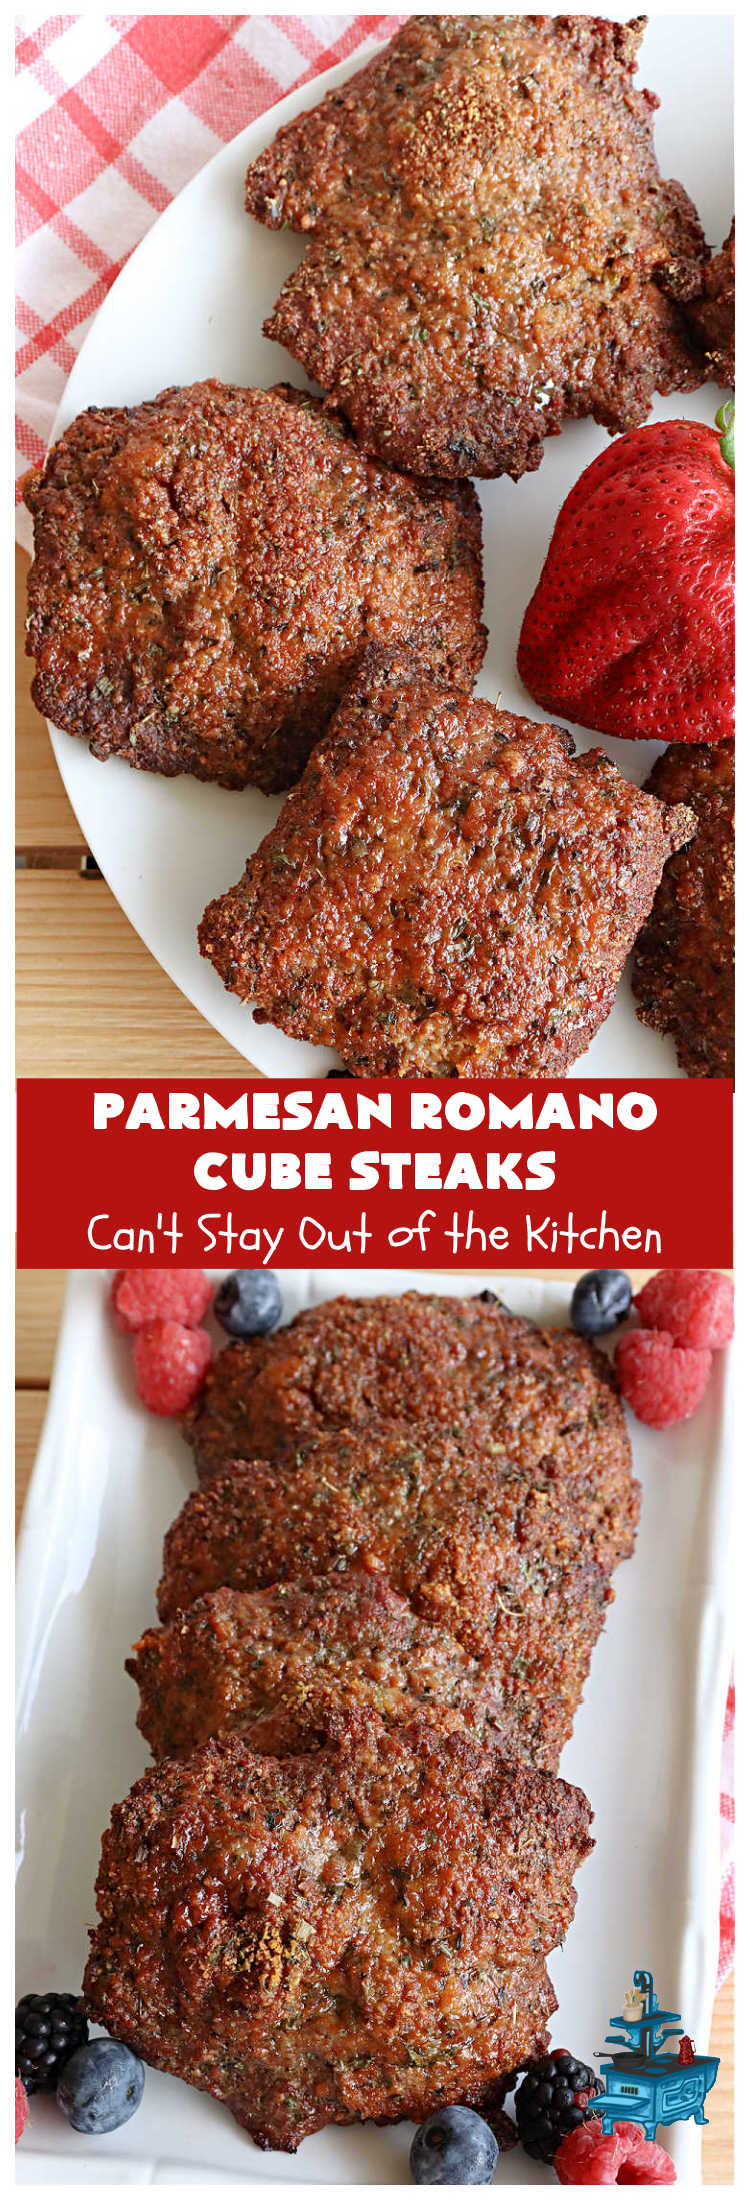 Parmesan Romano Cube Steaks | Can't Stay Out of the Kitchen | #ParmesanRomanoCubeSteaks is a great way to enjoy #CubeSteaks for dinner. This easy entree is oven ready in about 5 minutes. It's wonderful for weeknight dinners when you're short on time. This tasty #beef entree includes both #Parmesan & #Romano cheese along with several herbs to spice it up. #GlutenFree